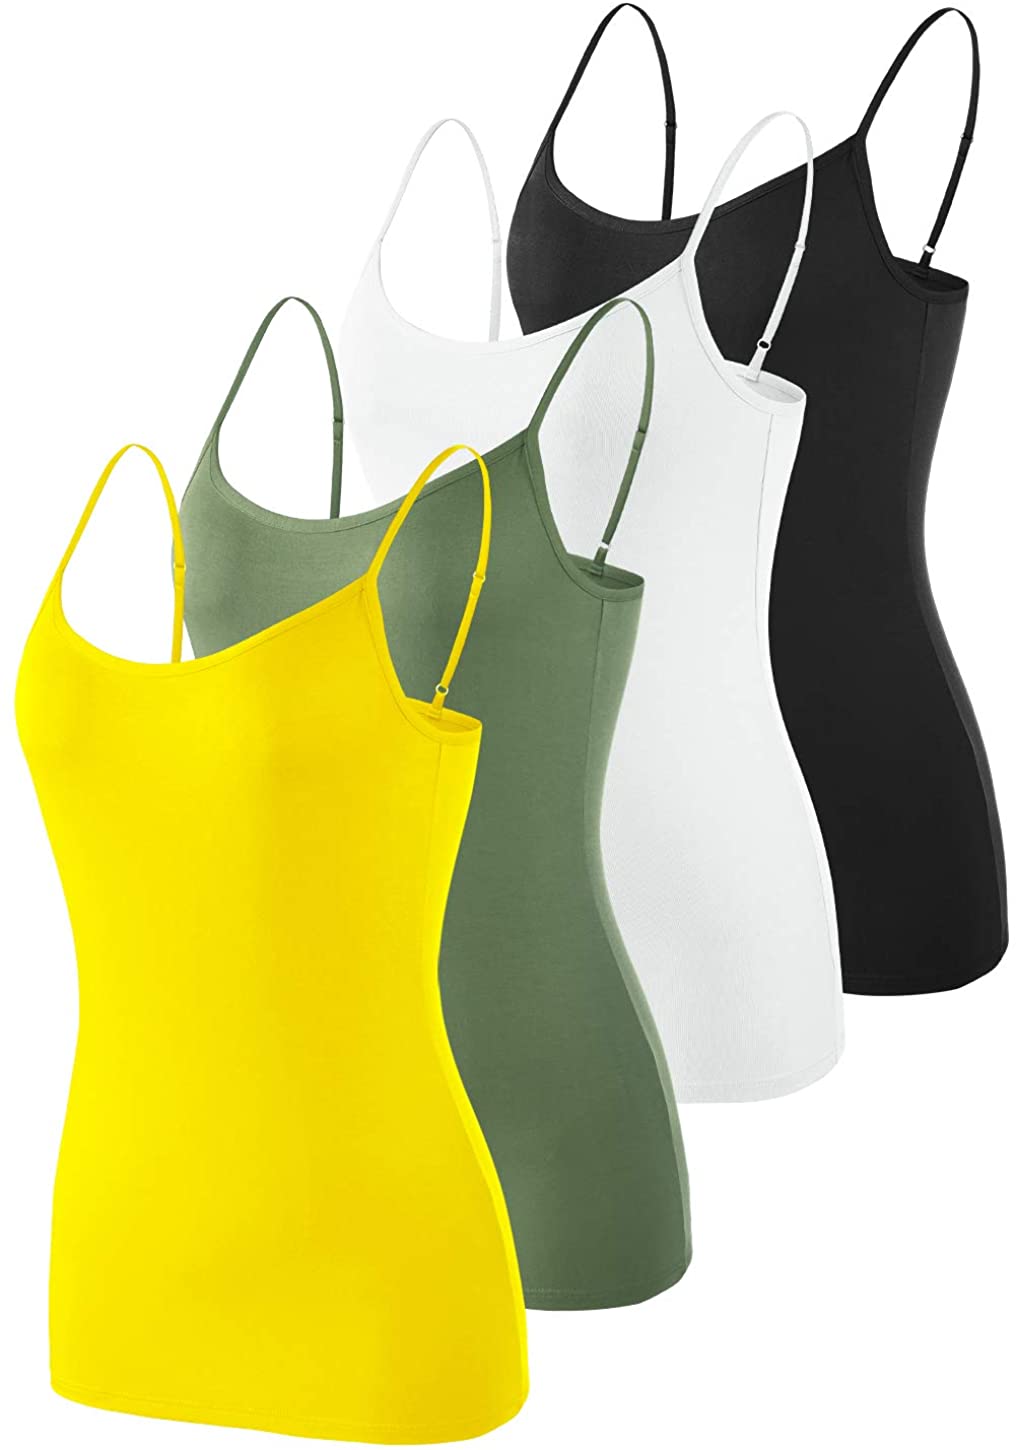 Vislivin Womens Cotton Camisole Adjustable Strap Tank Tops with